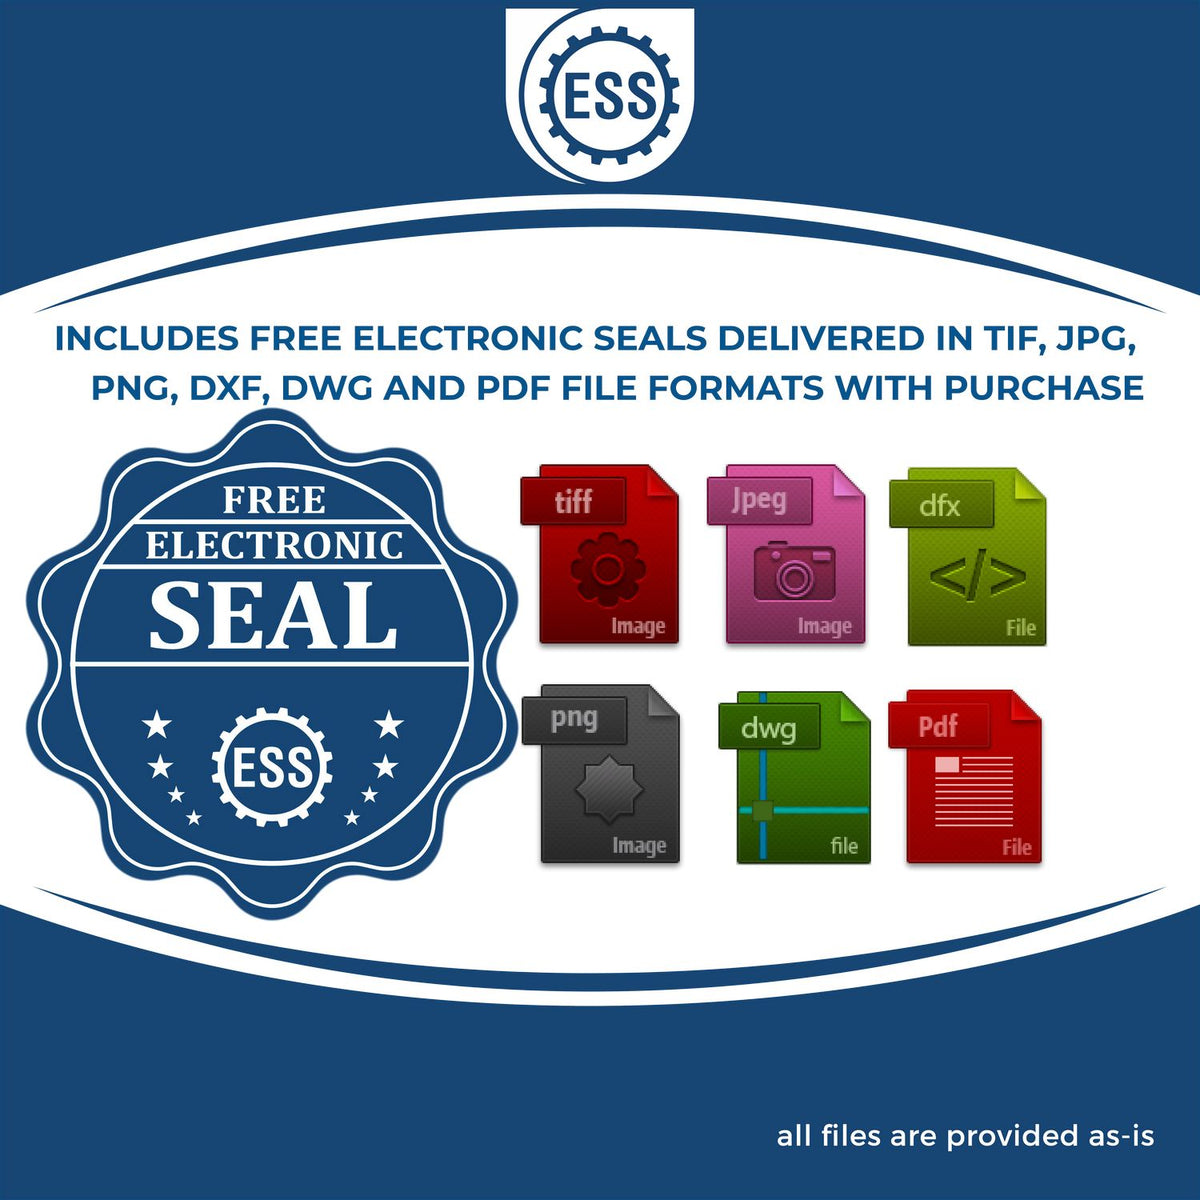 An infographic for the free electronic seal for the Soft Kansas Professional Geologist Seal illustrating the different file type icons such as DXF, DWG, TIF, JPG and PNG.